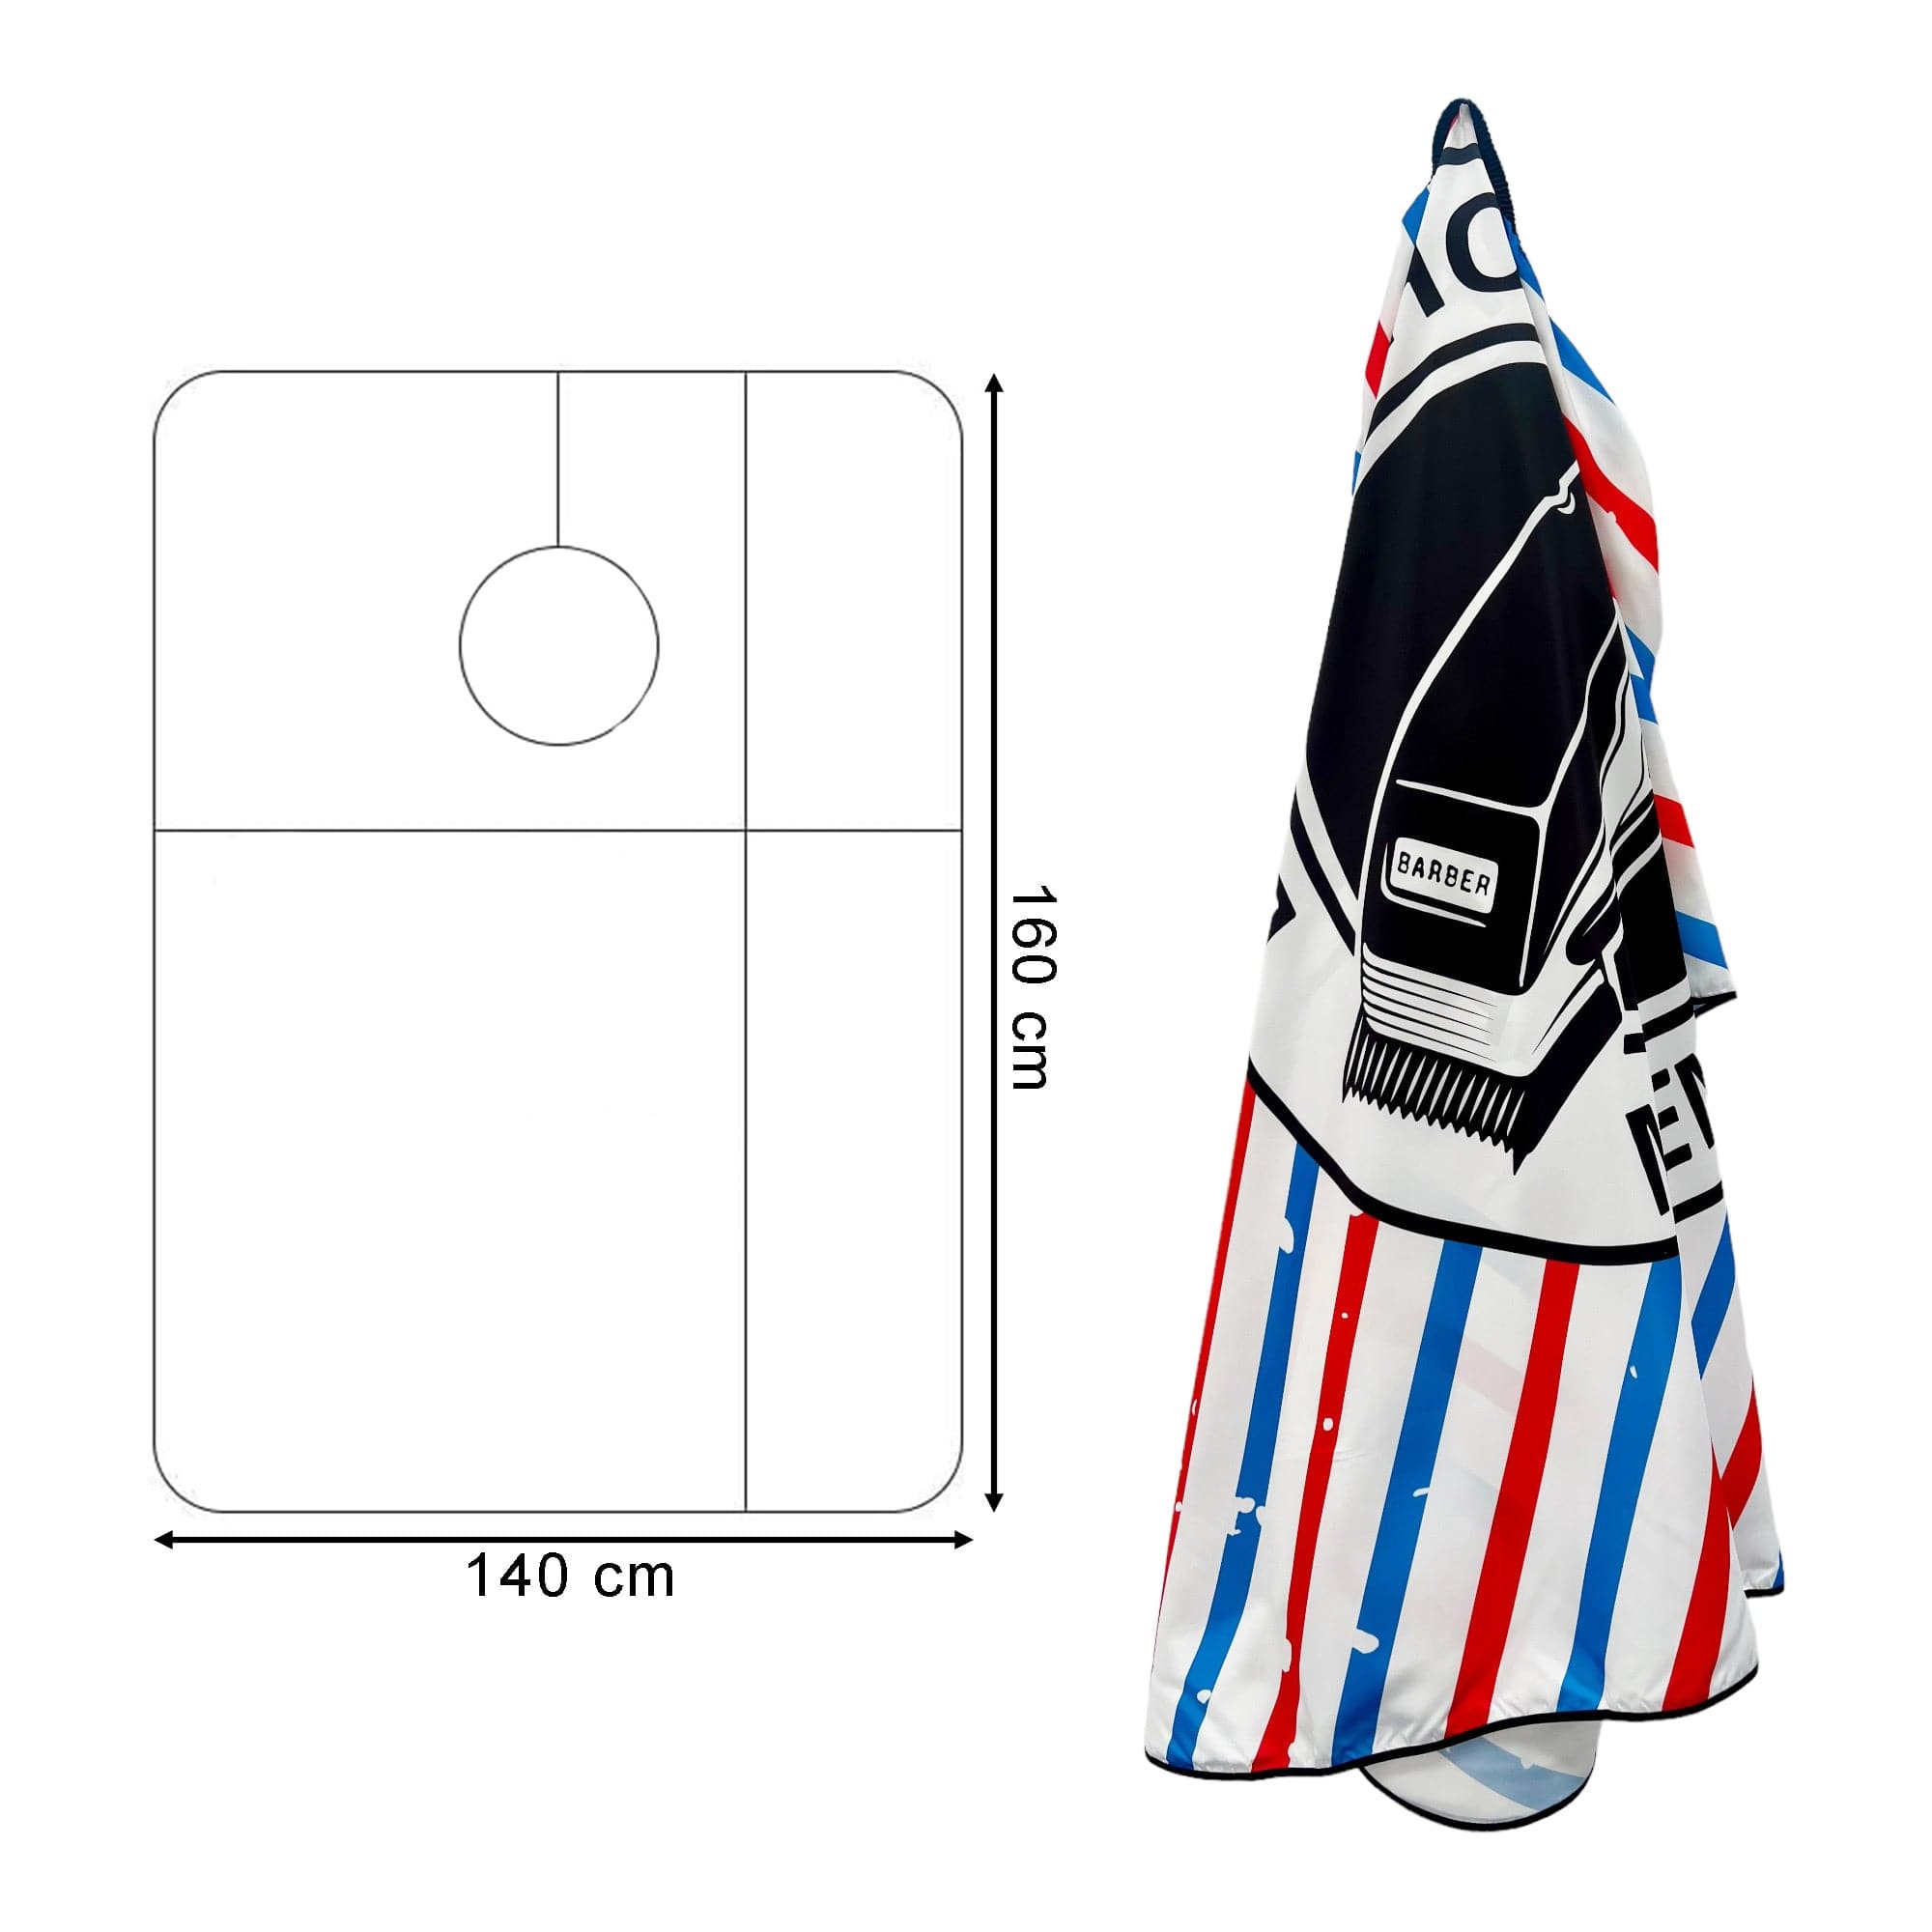 Gabri - Barber Hairdressing Hair Cutting Capes & Gowns Clipper Pattern (Red White & Blue)